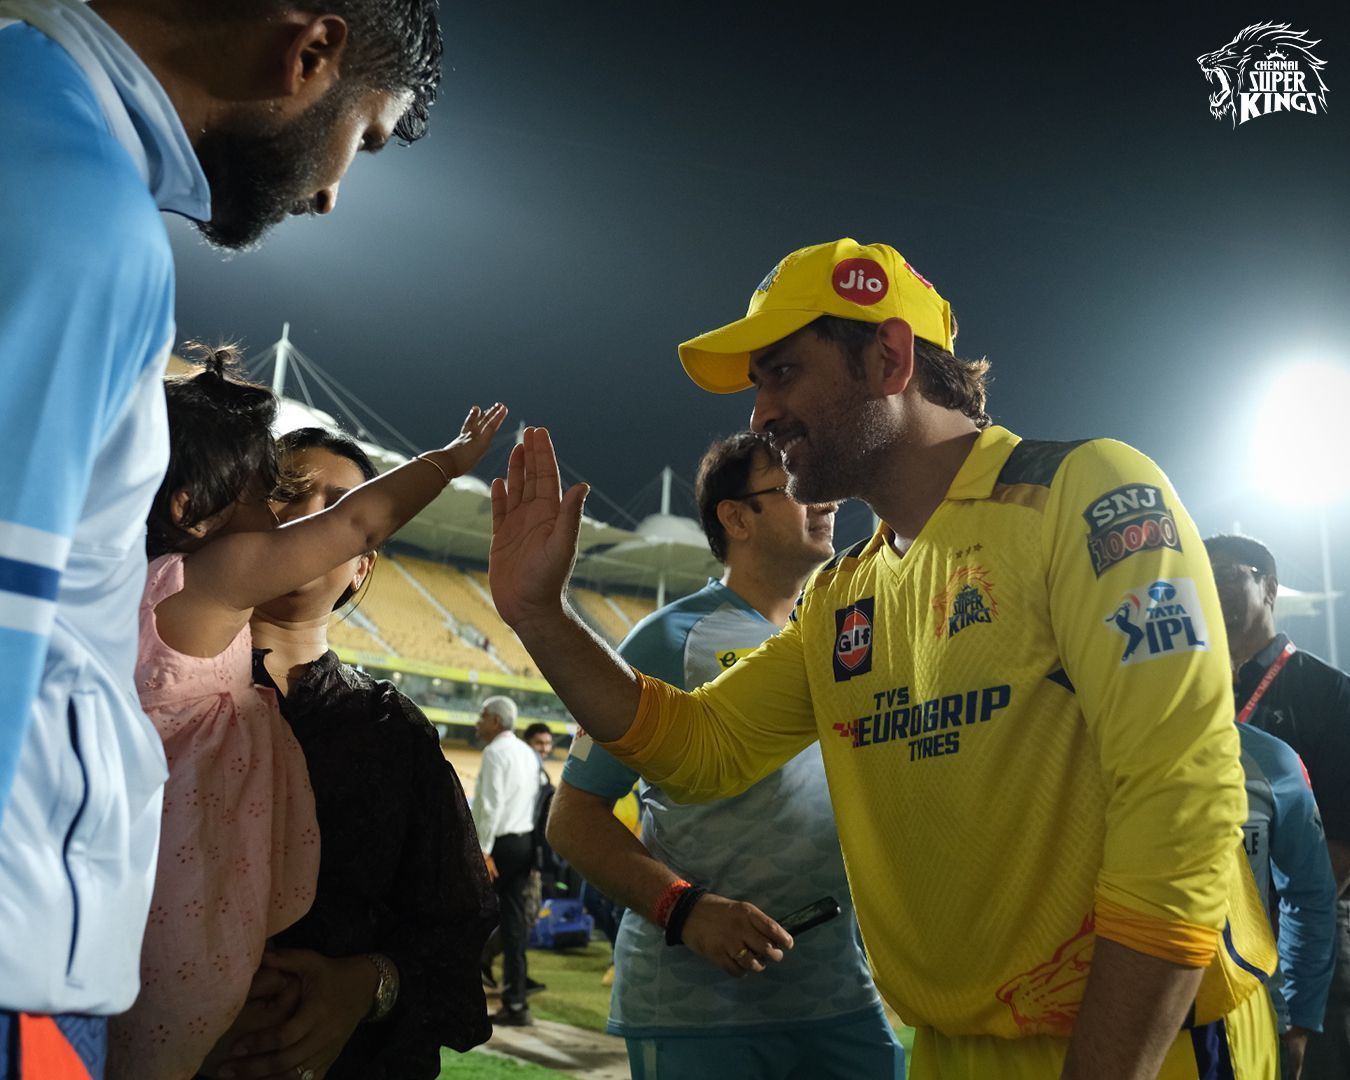 MS Dhoni shares a wholesome moment with Krishnappa Gowtham